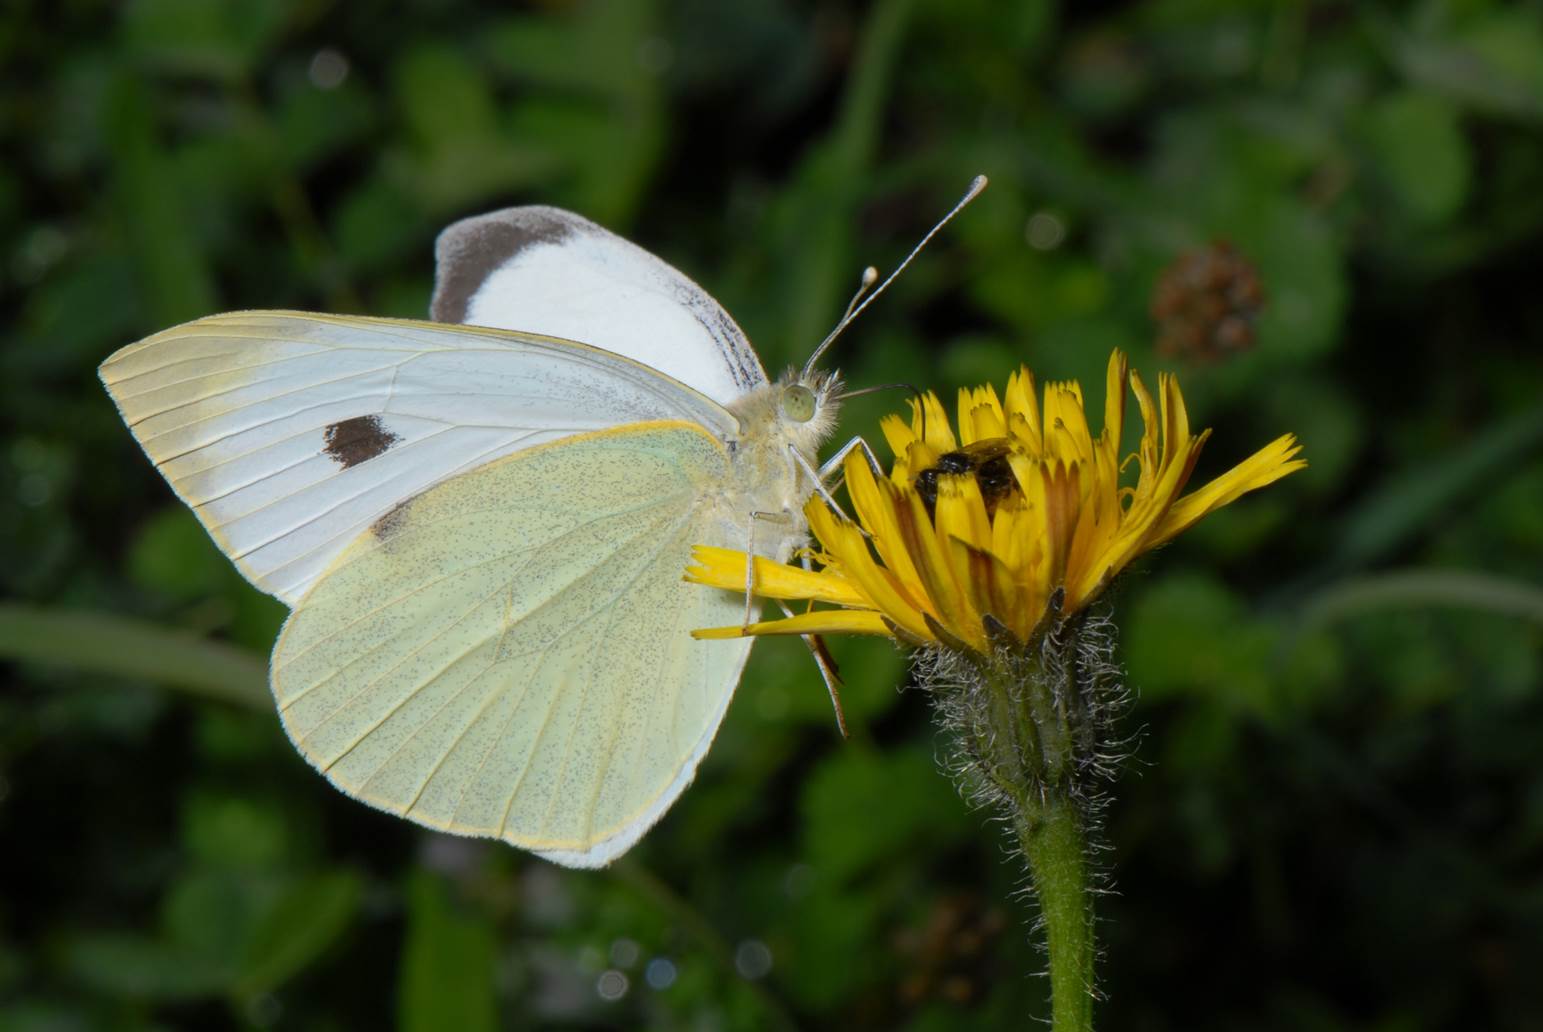 A white butterfly on a yellow flower

Description automatically generated